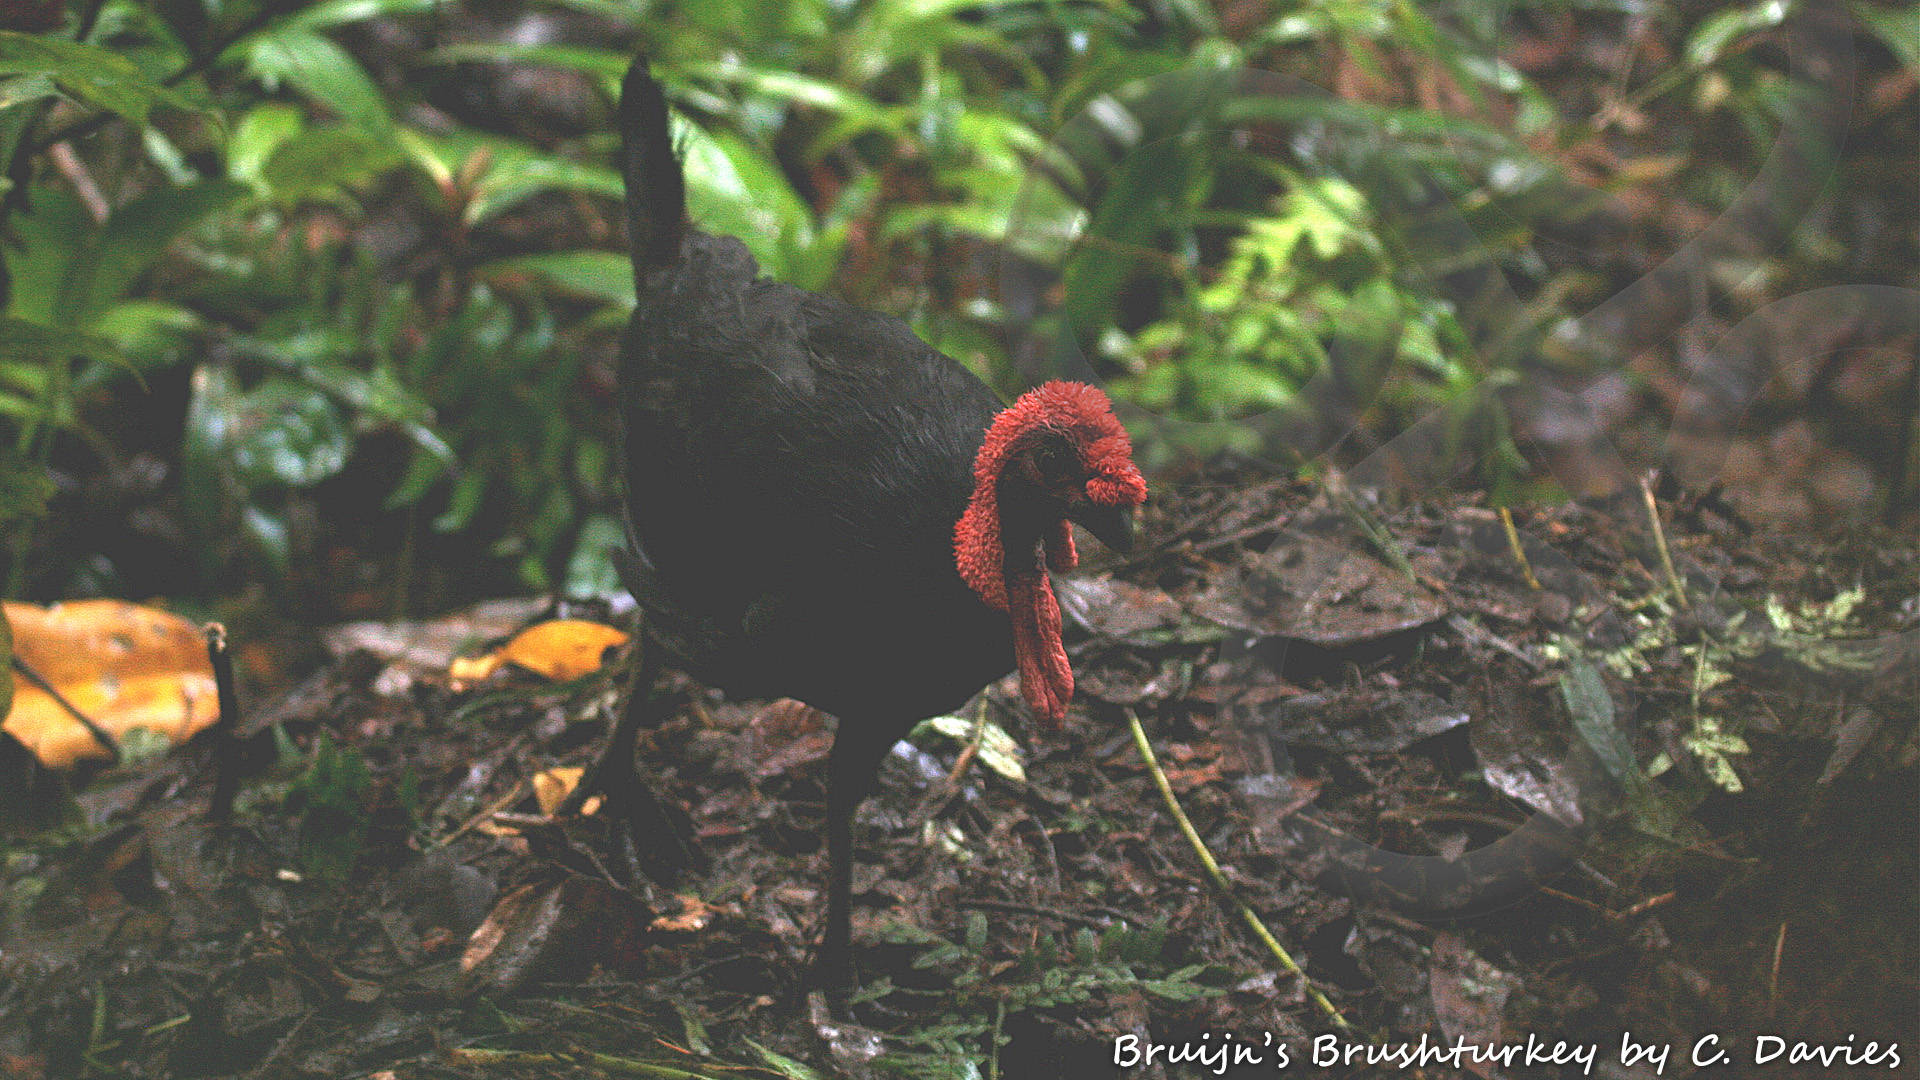 Adult mound-tending male Bruijn's Brushturkey Aepypodius bruijnii photographed for the first time ever in the wild, atop its nest mound in ridgetop cloud-forest on Mount Danai, Waigeo Island, Raja Ampat archipelago, eastern Indonesia. Copyright © Papua Expeditions and C. Davies